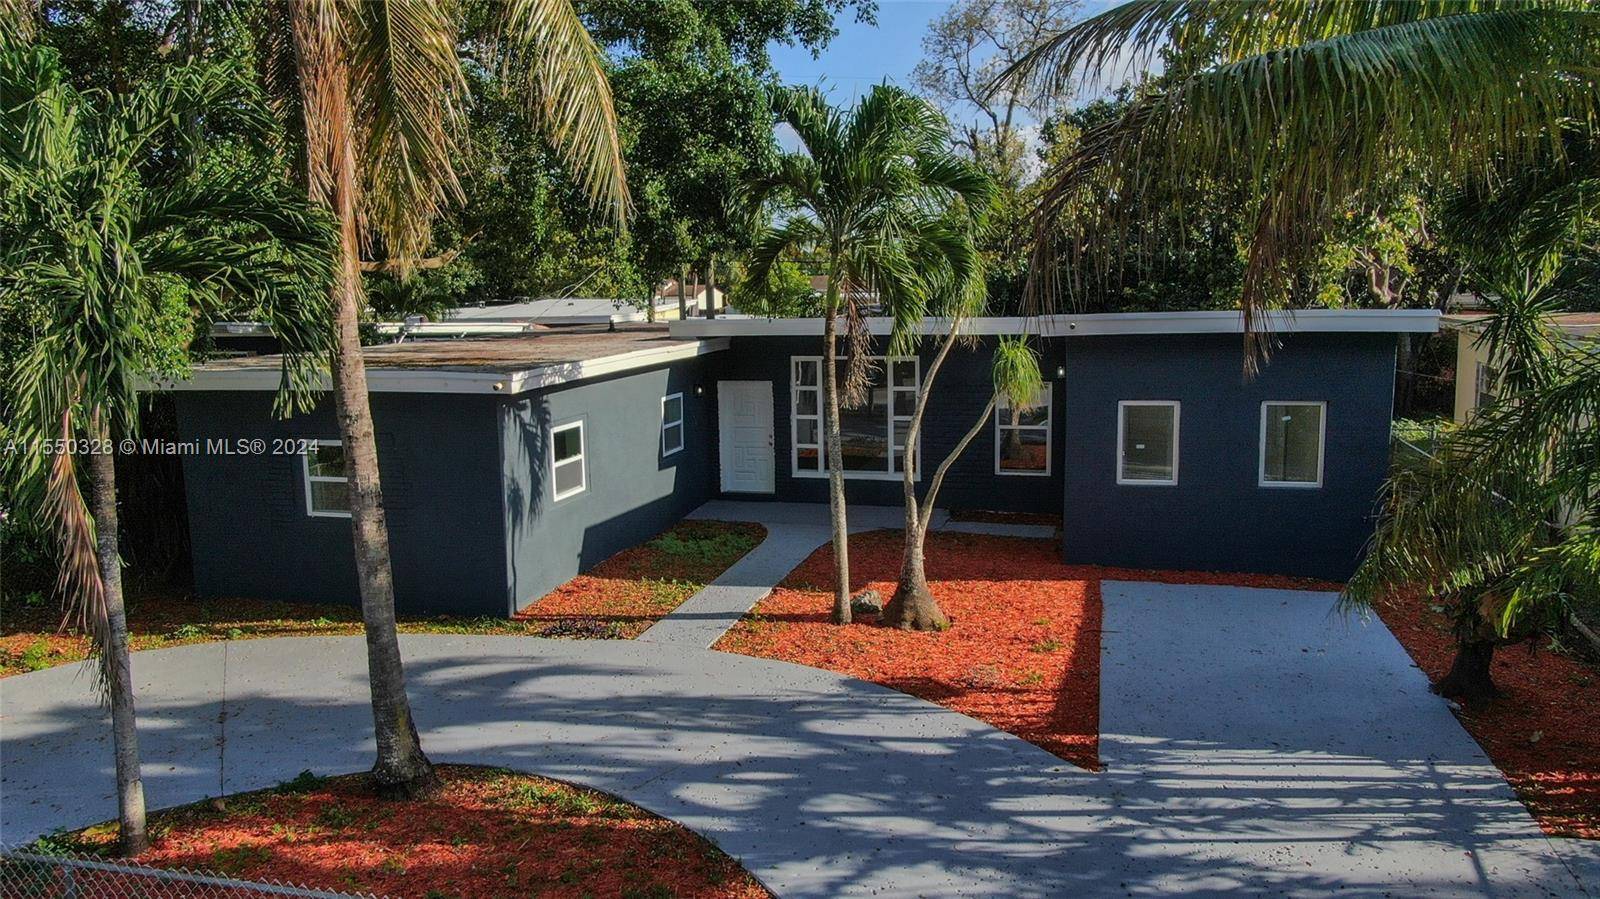 WEST MIAMI SHORES Completely remodeled 4 2 home.